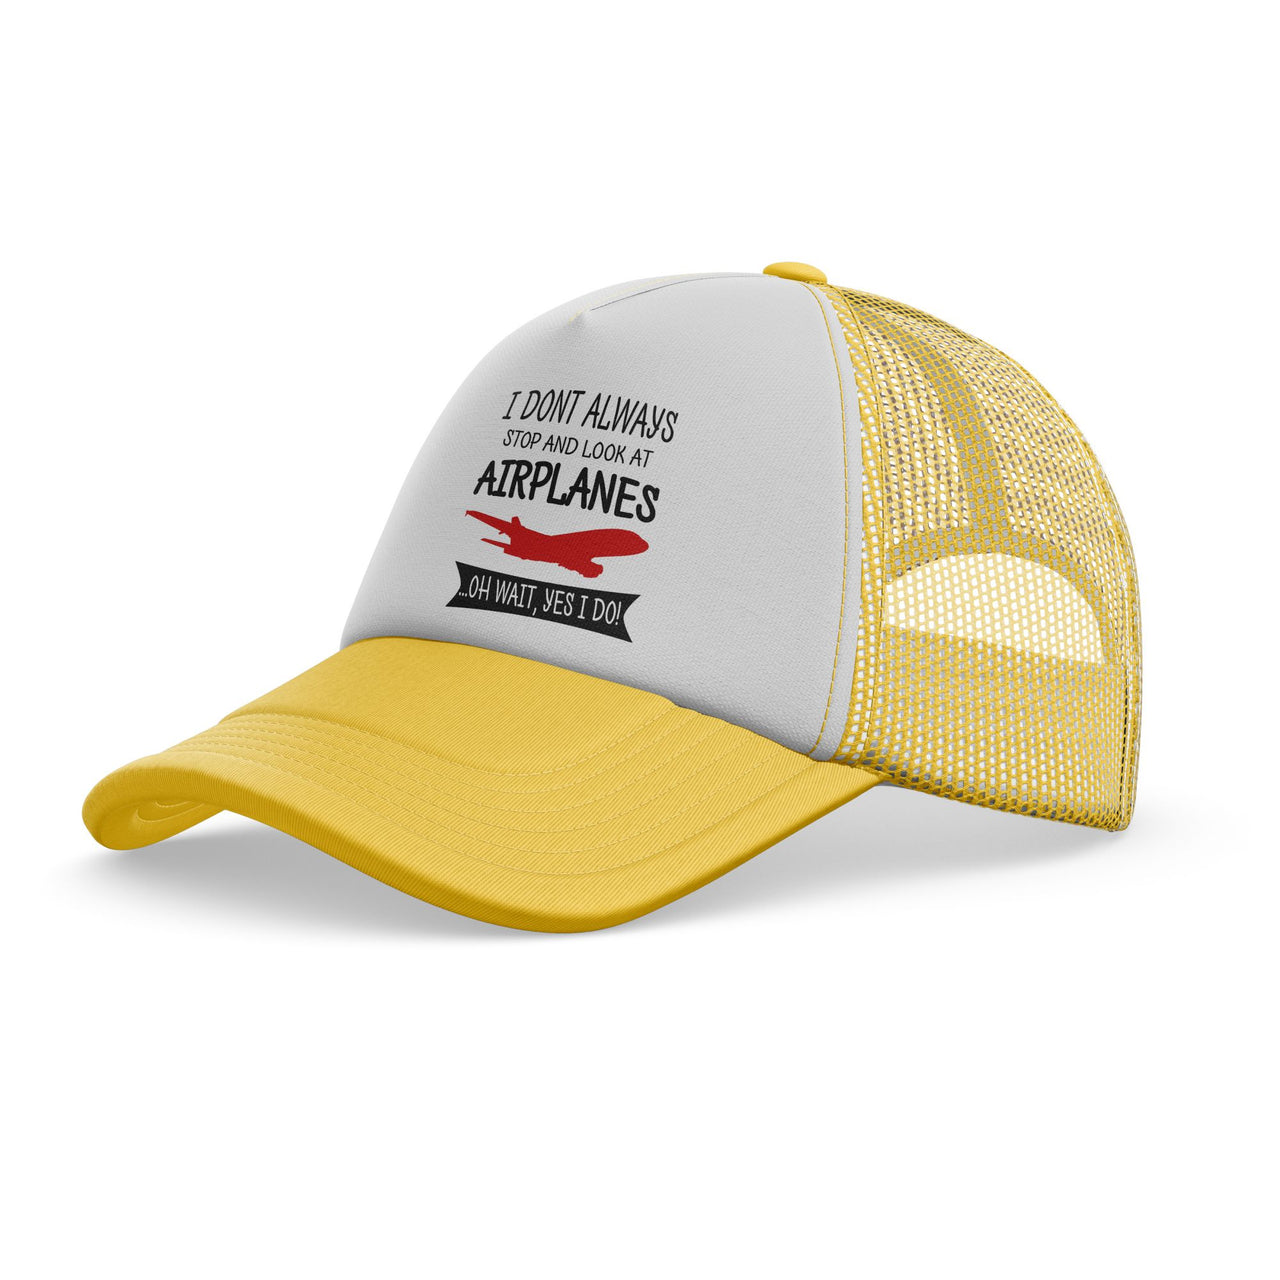 I Don't Always Stop and Look at Airplanes Designed Trucker Caps & Hats